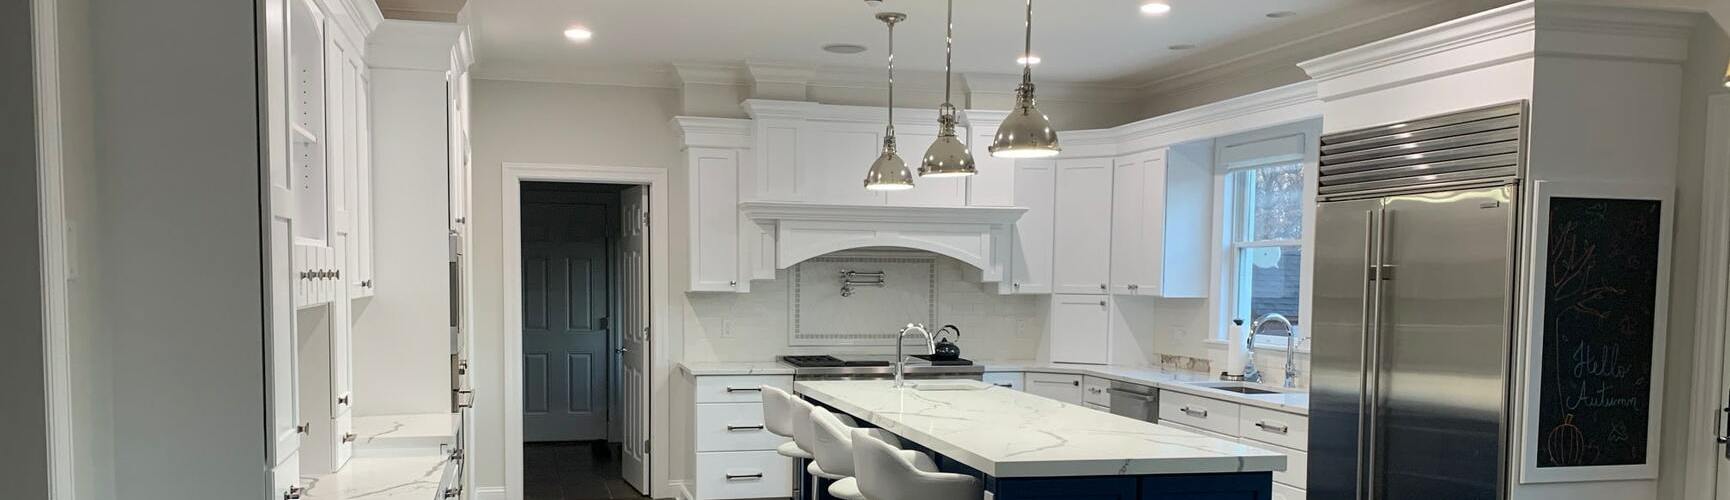 Professional painted modern white kitchen cabinets